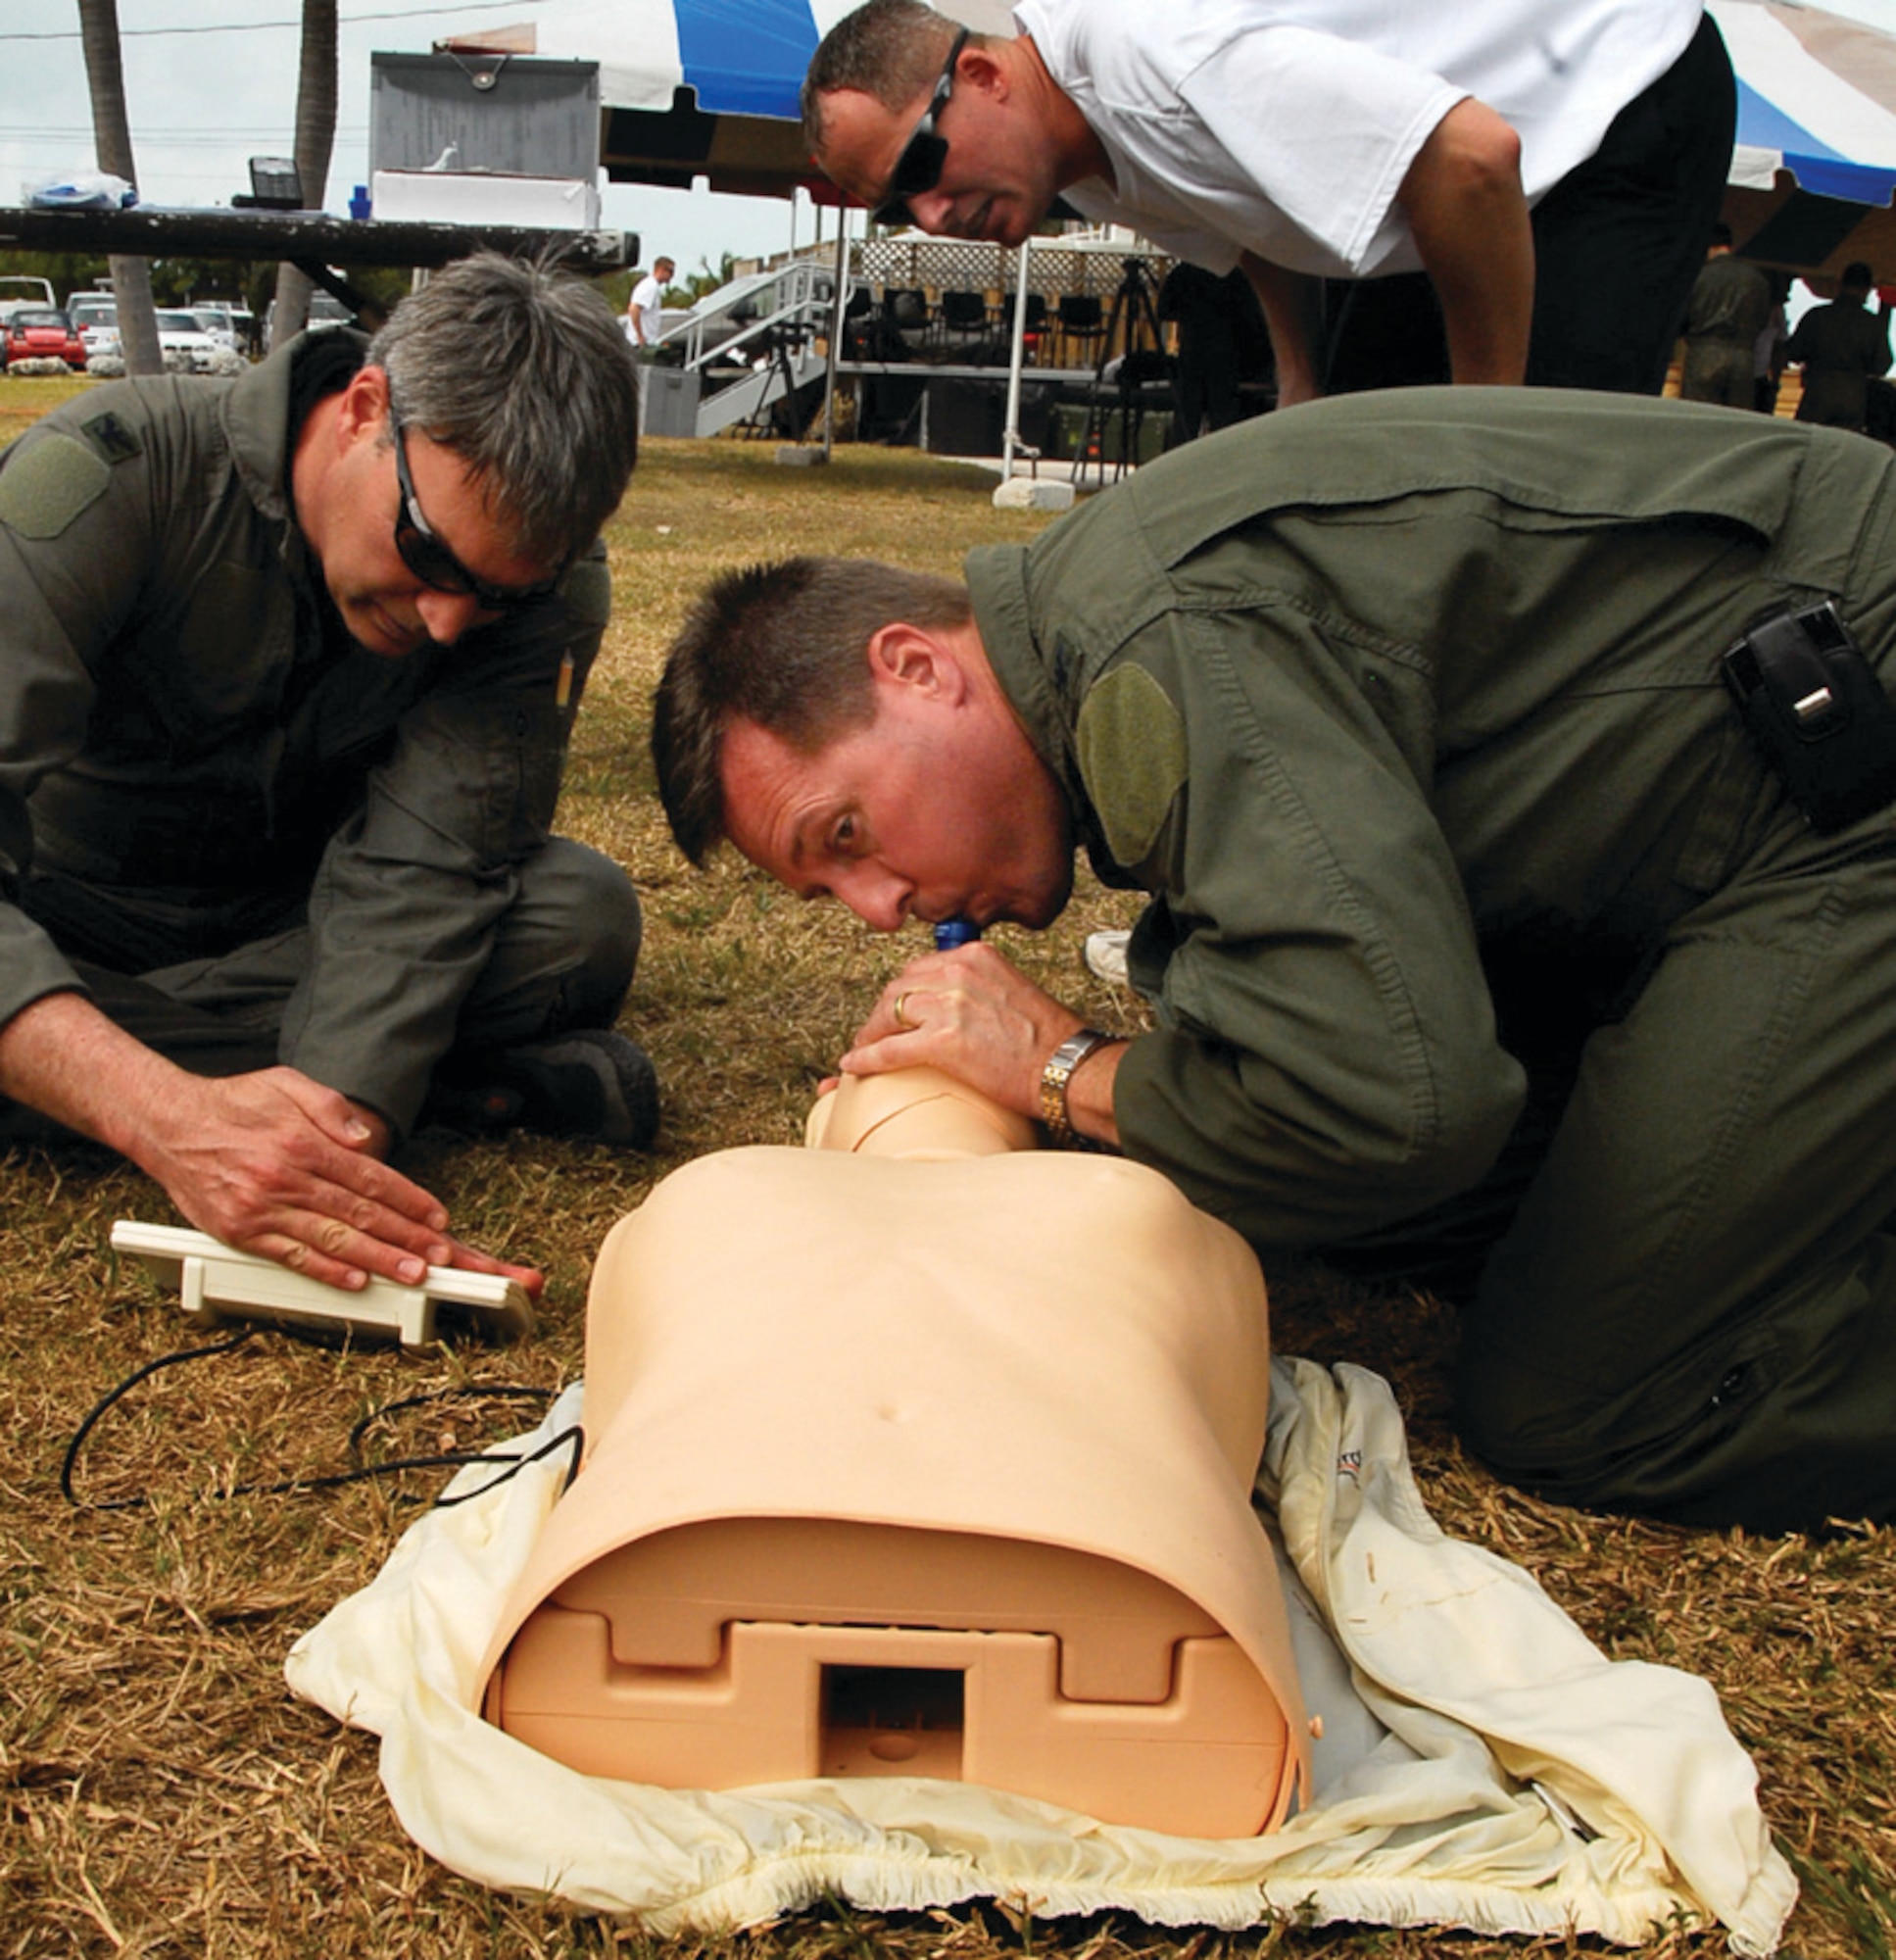 Colonel Gary L. Akins, 201 AS commander, performs rescue breathing on a CPR dummy, while Col. Kurt Vogel, National Guard Bureau AF/A8 advisor, looks at the monitor to ensure Colonel Akins is giving the correct amount of breath. (U.S. Air Force photo/ Tech. Sgt. Adrianne Wilson)